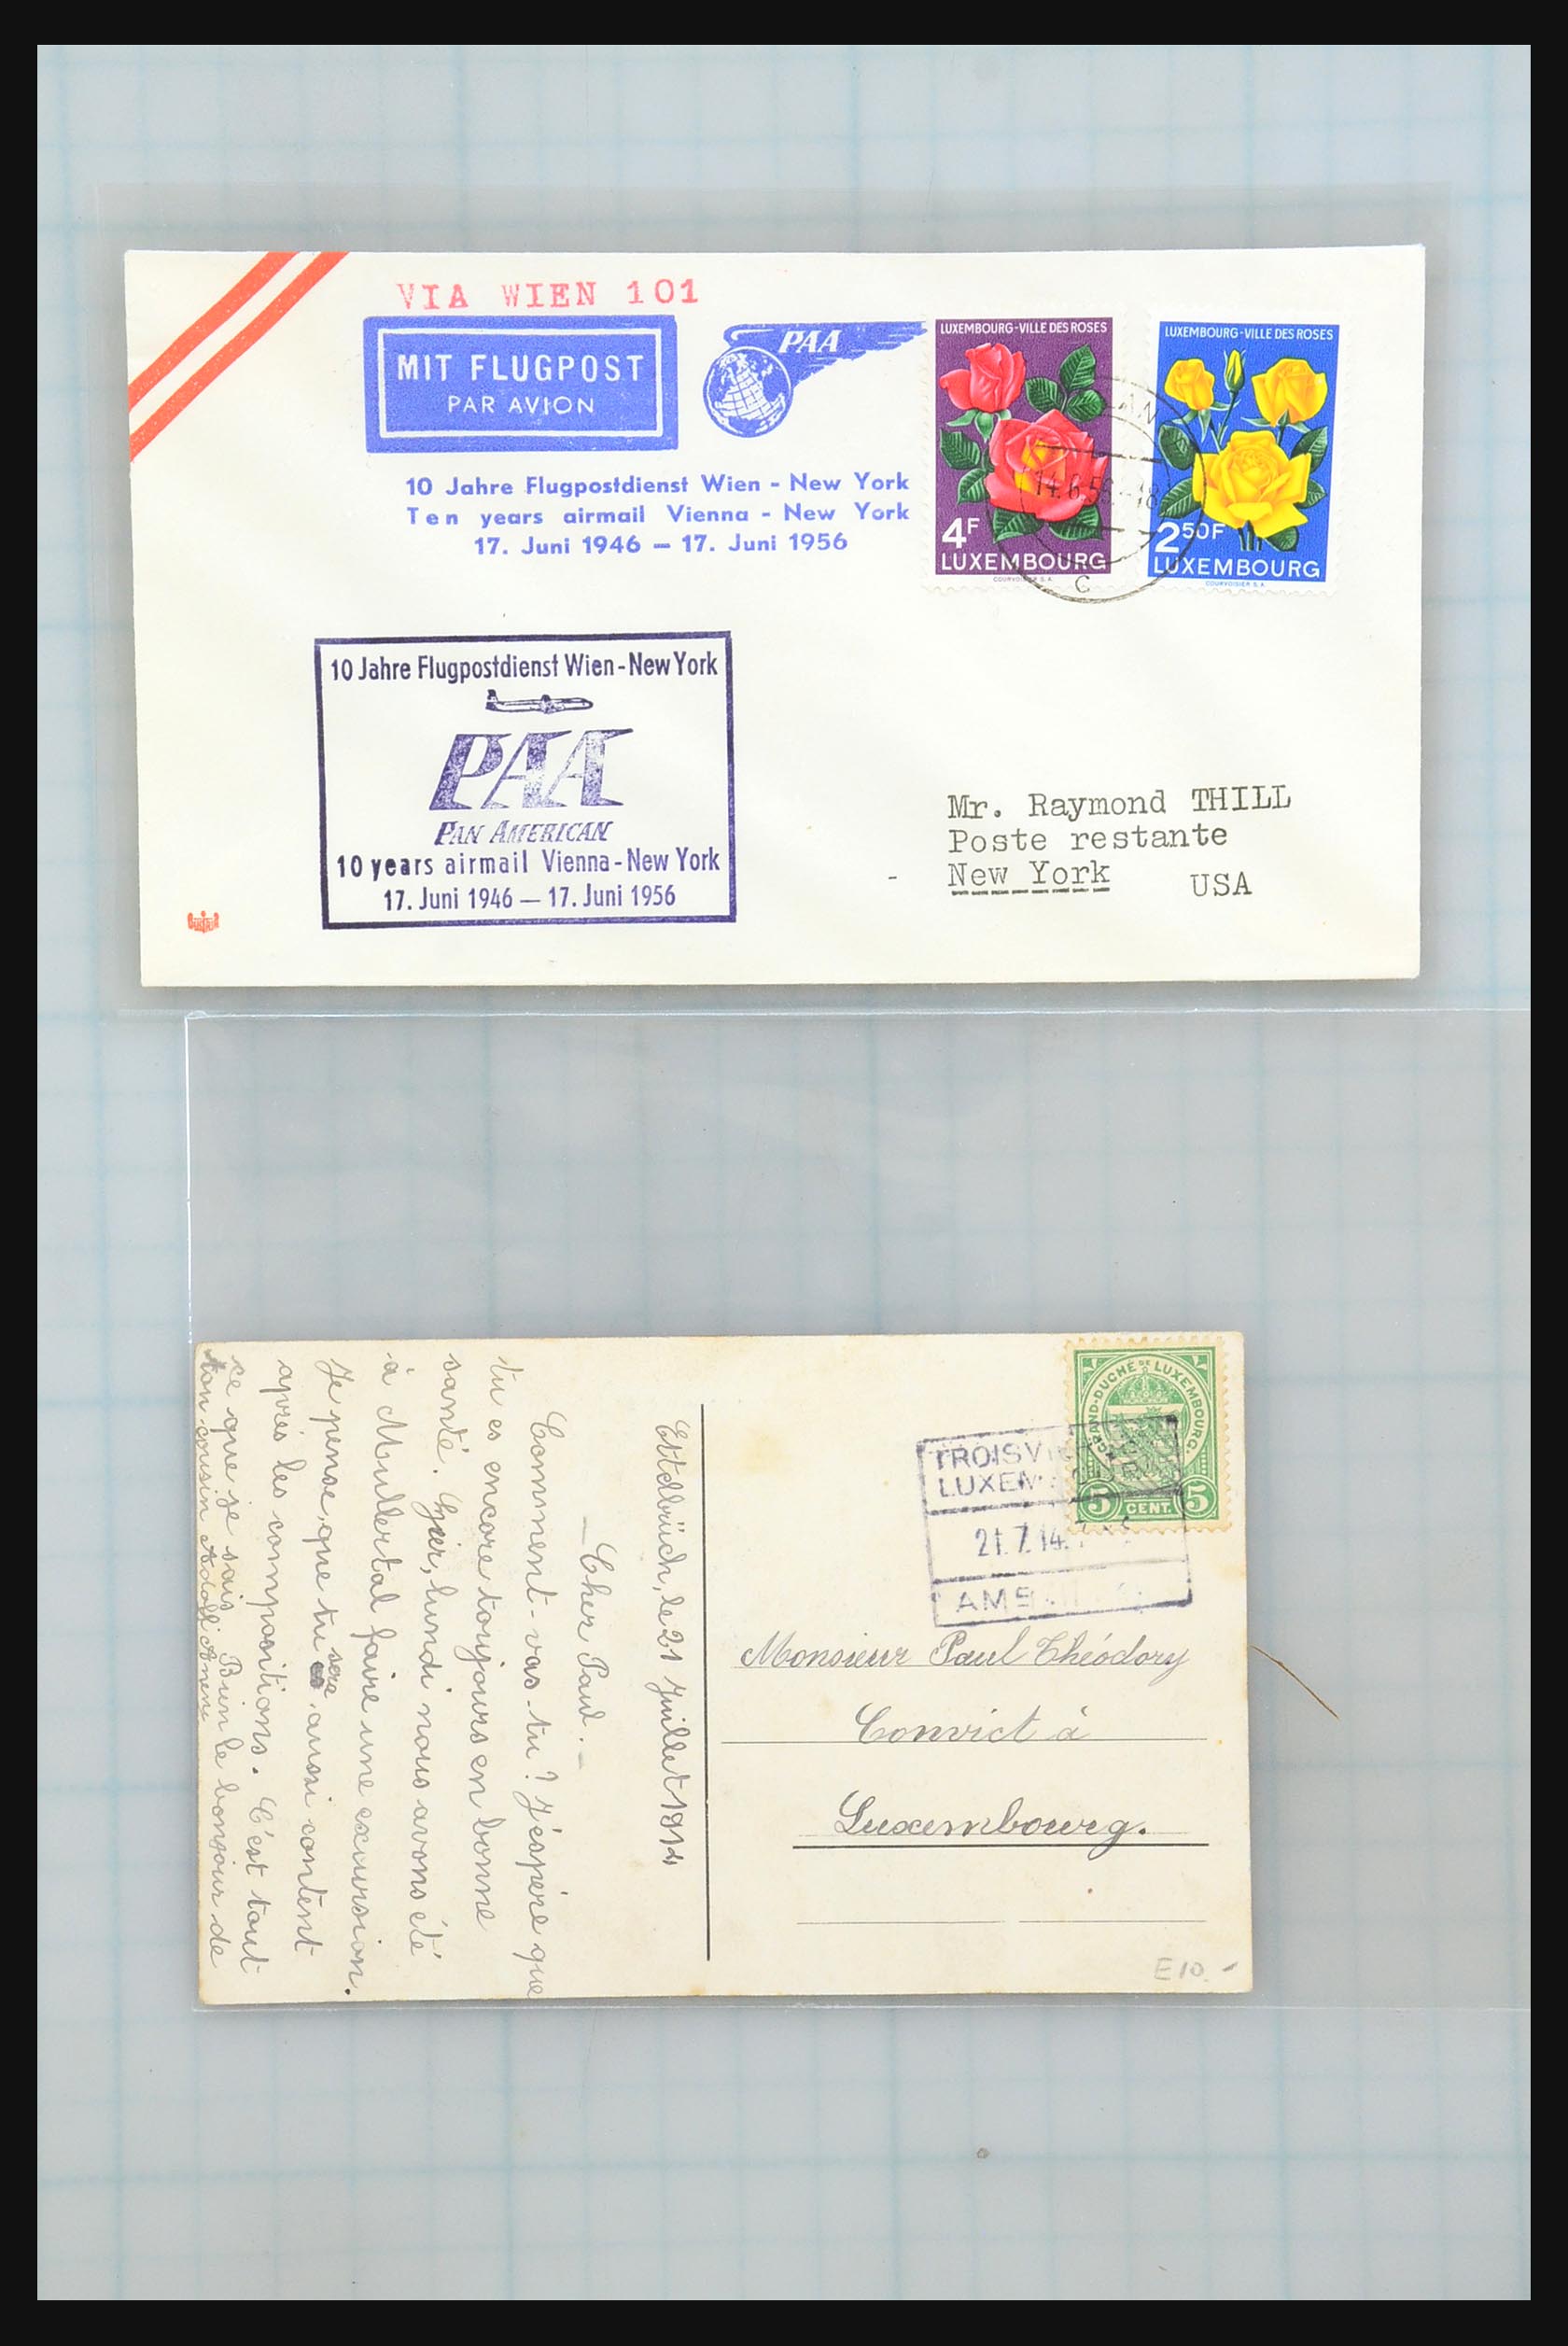 31358 077 - 31358 Portugal/Luxemburg/Greece covers 1880-1960.